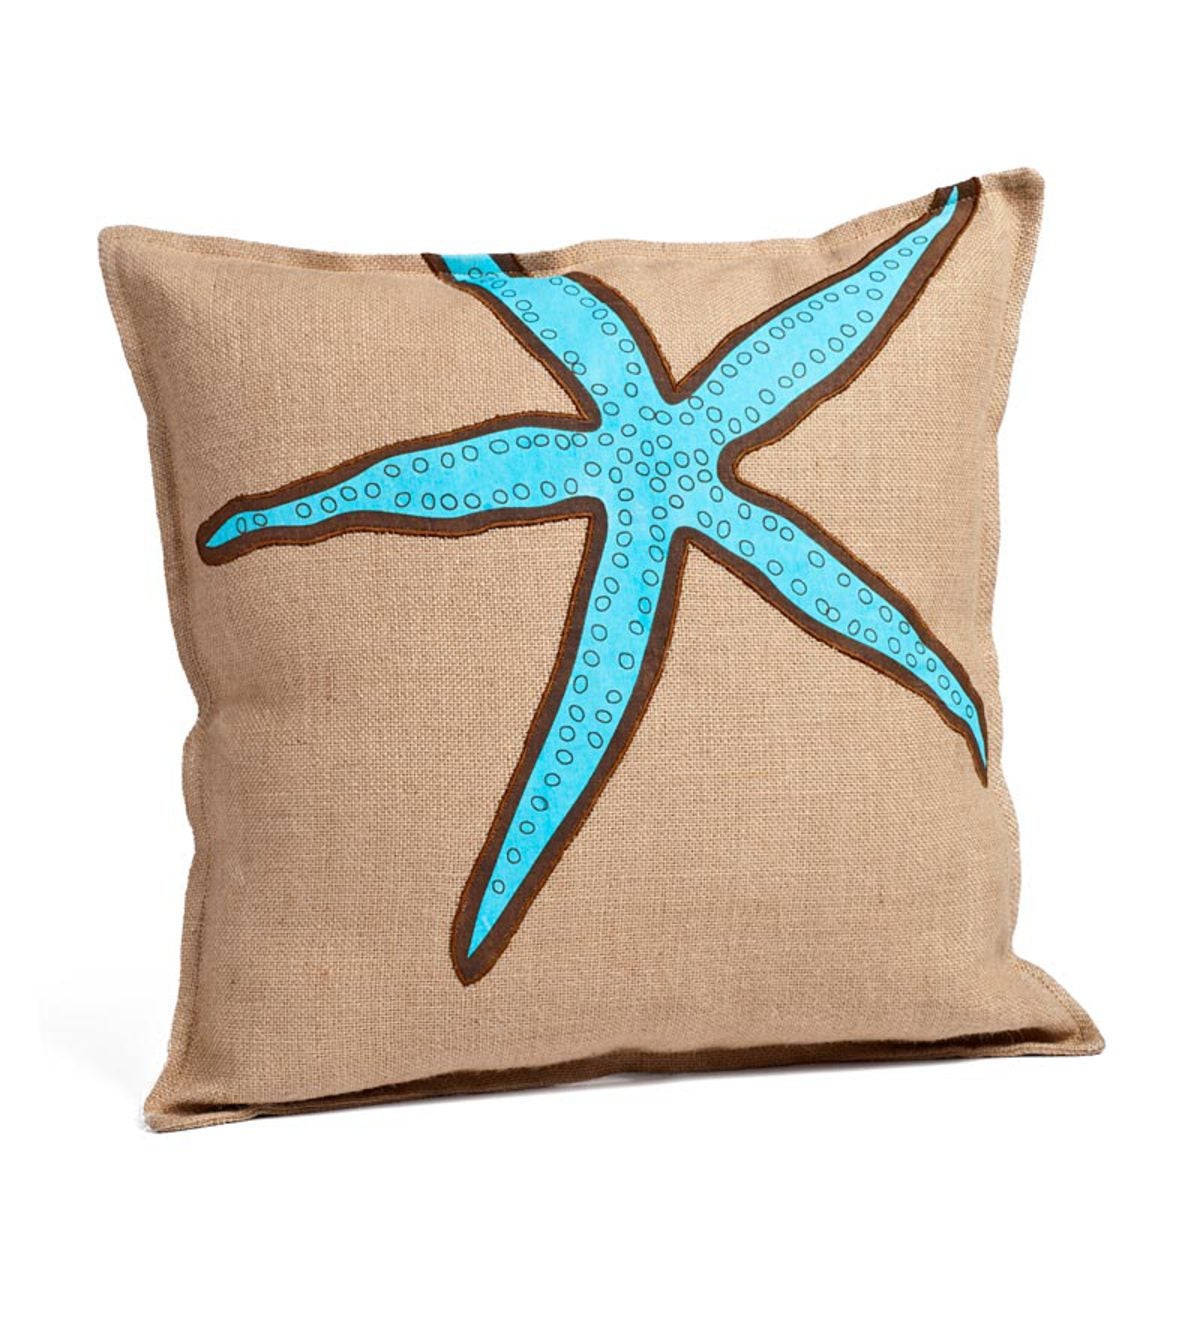 Washed Burlap Accent Pillow With Cotton Starfish Appliqué